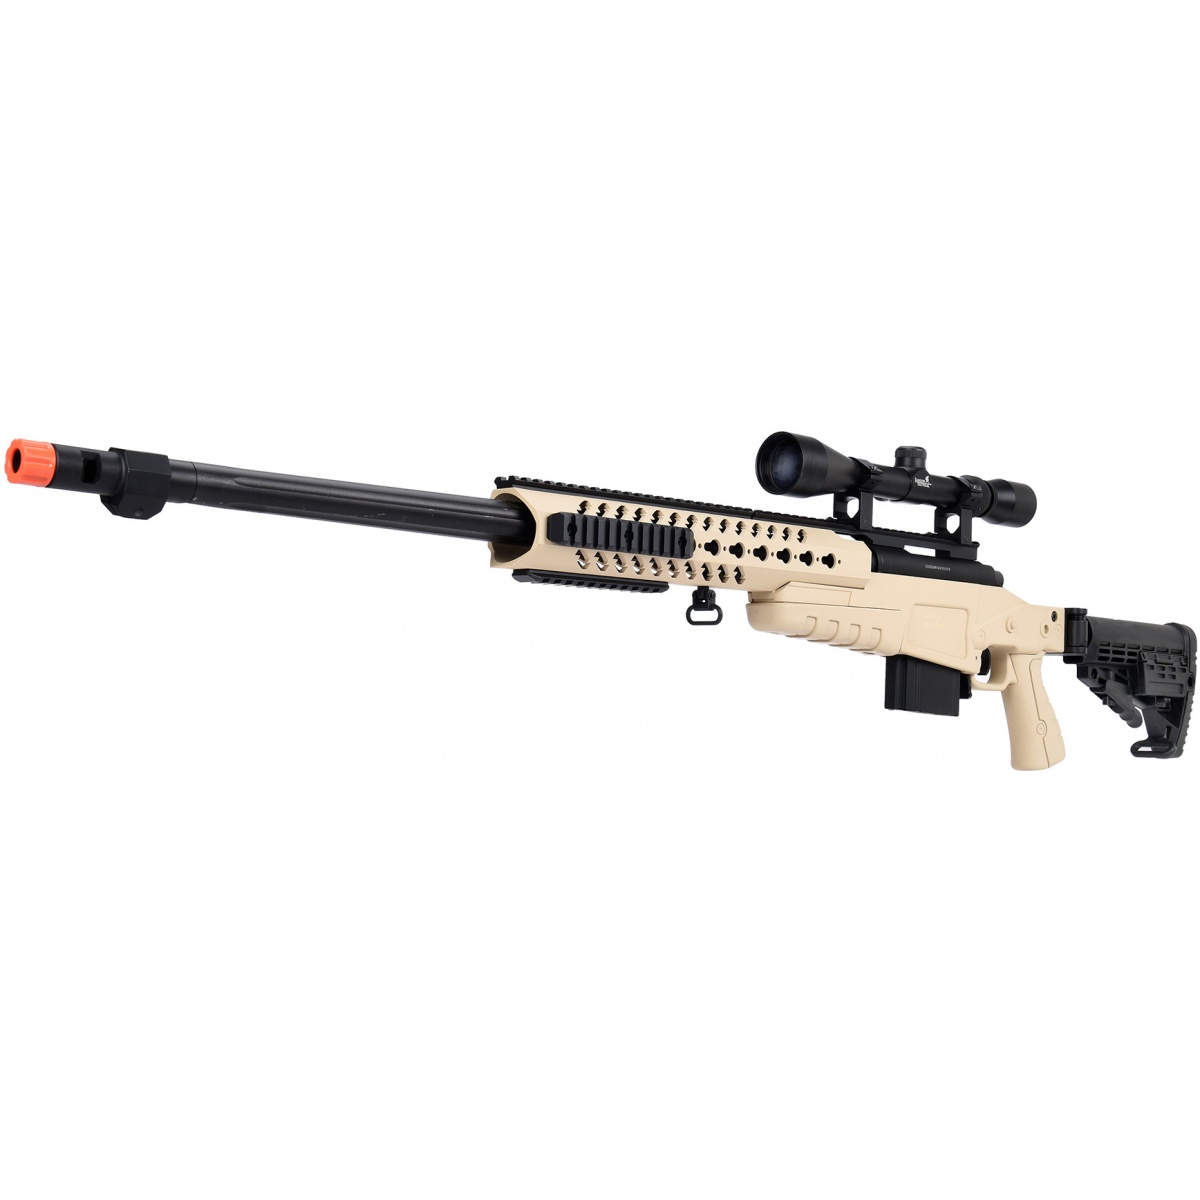 WellFire MB4418-1 Bolt Action Airsoft Sniper Rifle w/ Scope - TAN ...